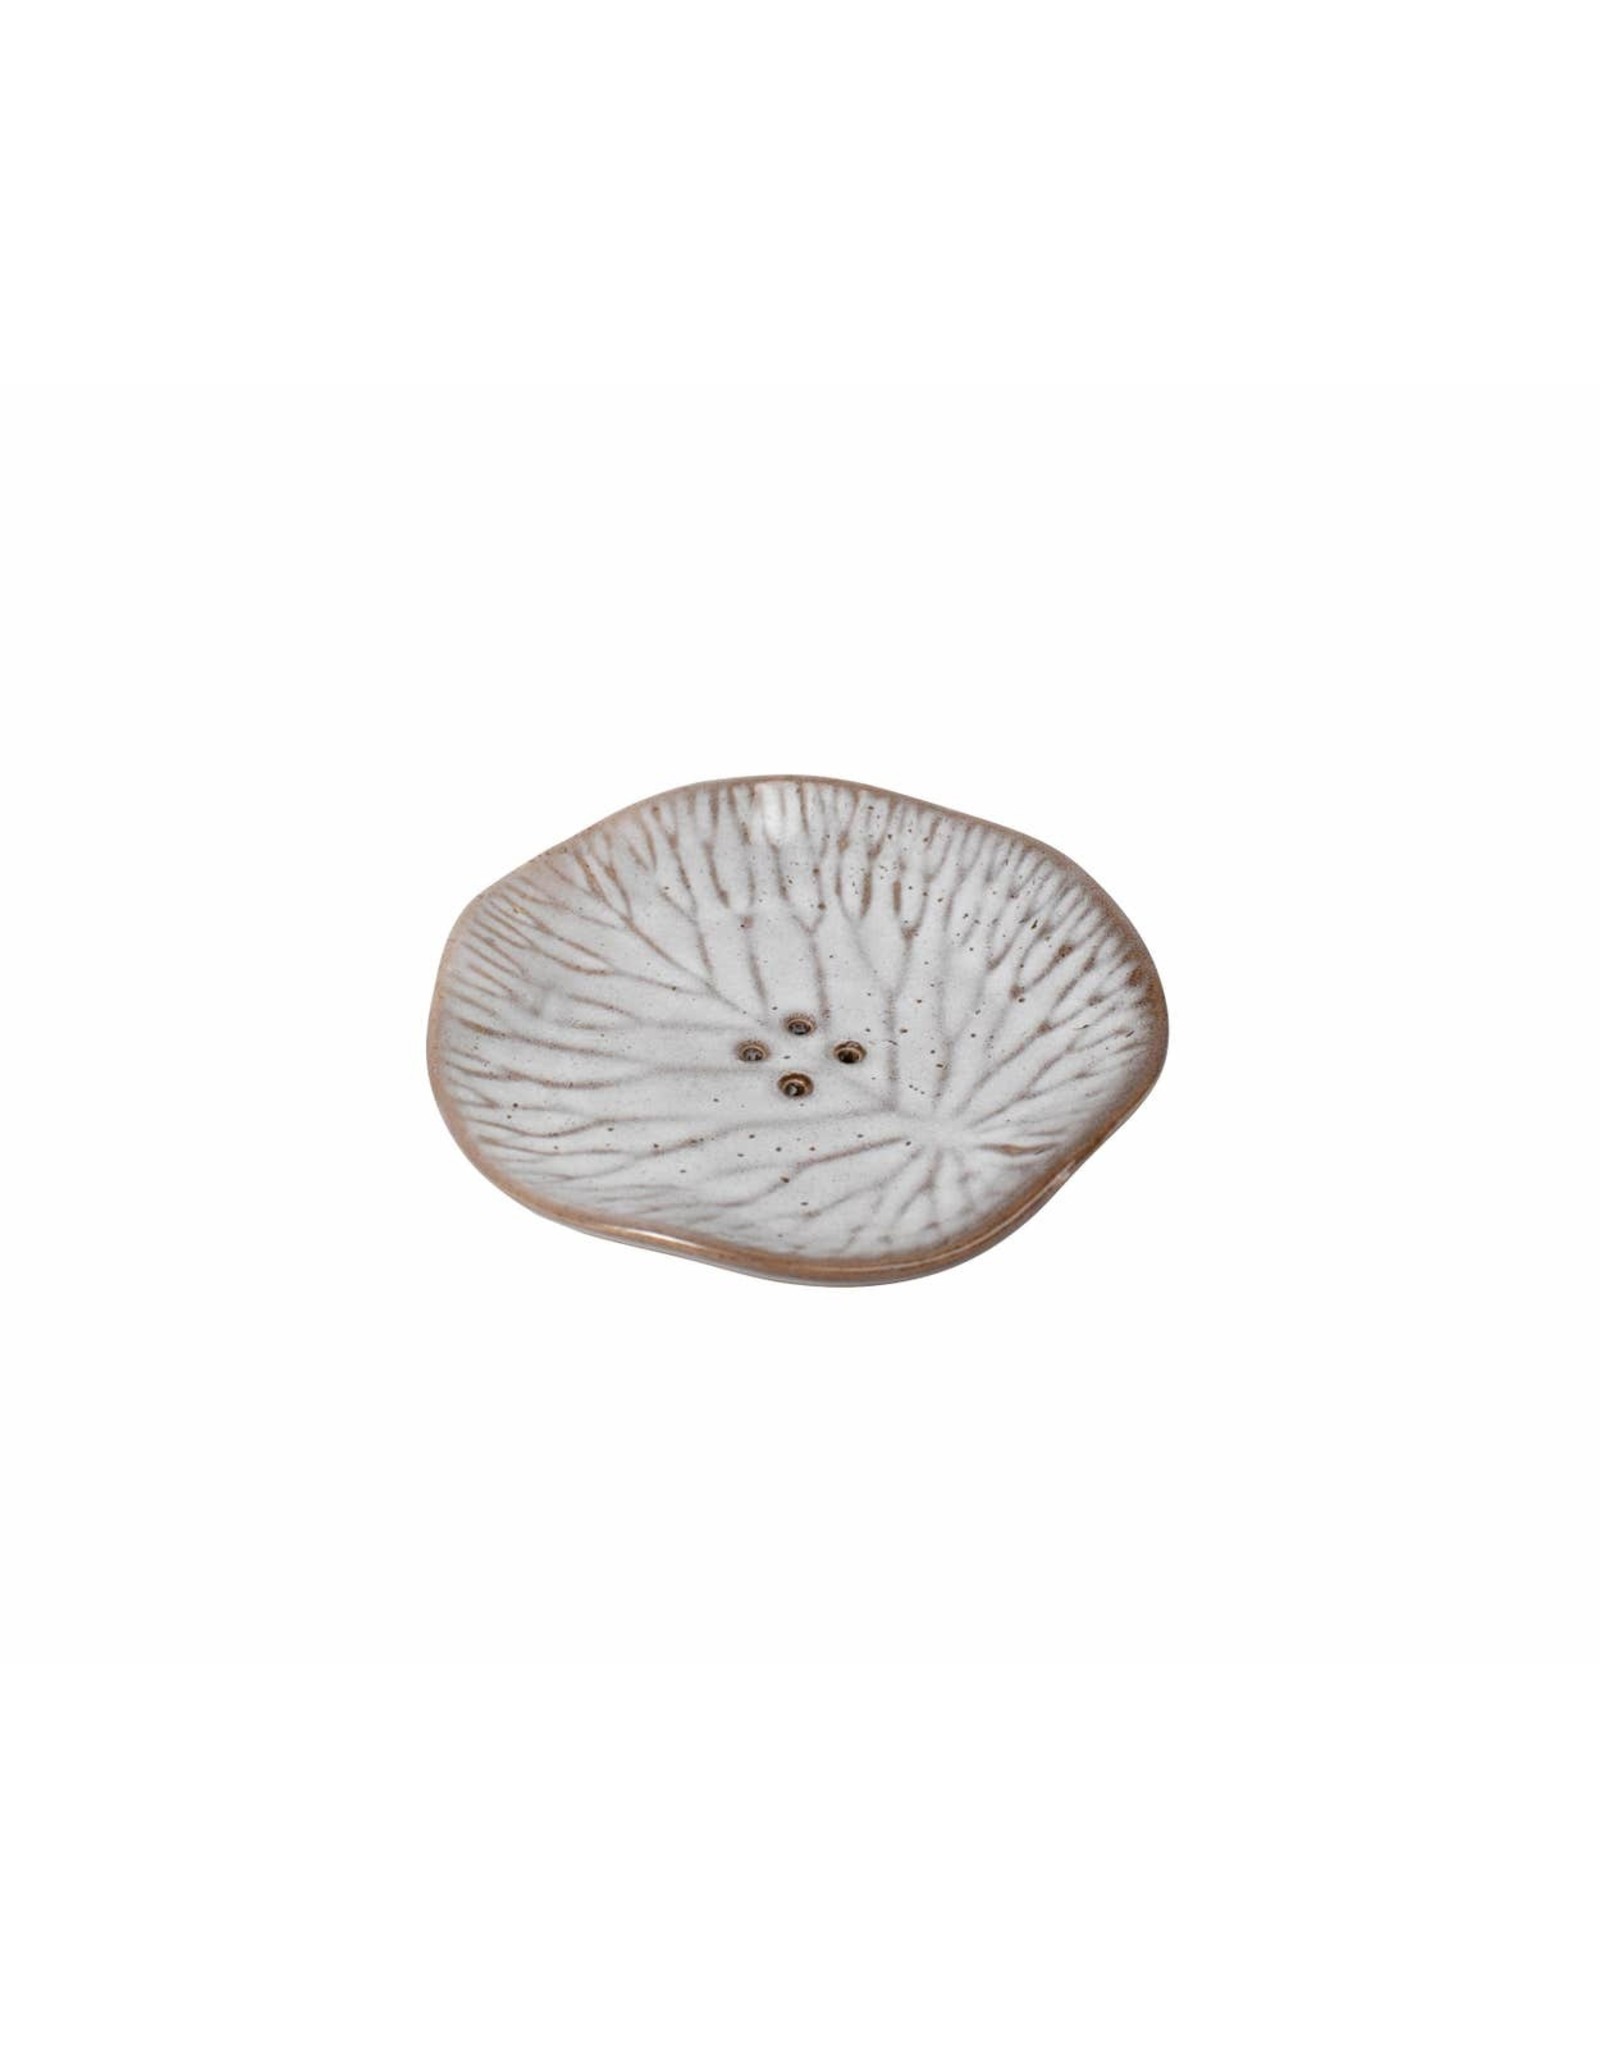 Trade roots Ceramic Lily Pad Soap Dish, Indonesia